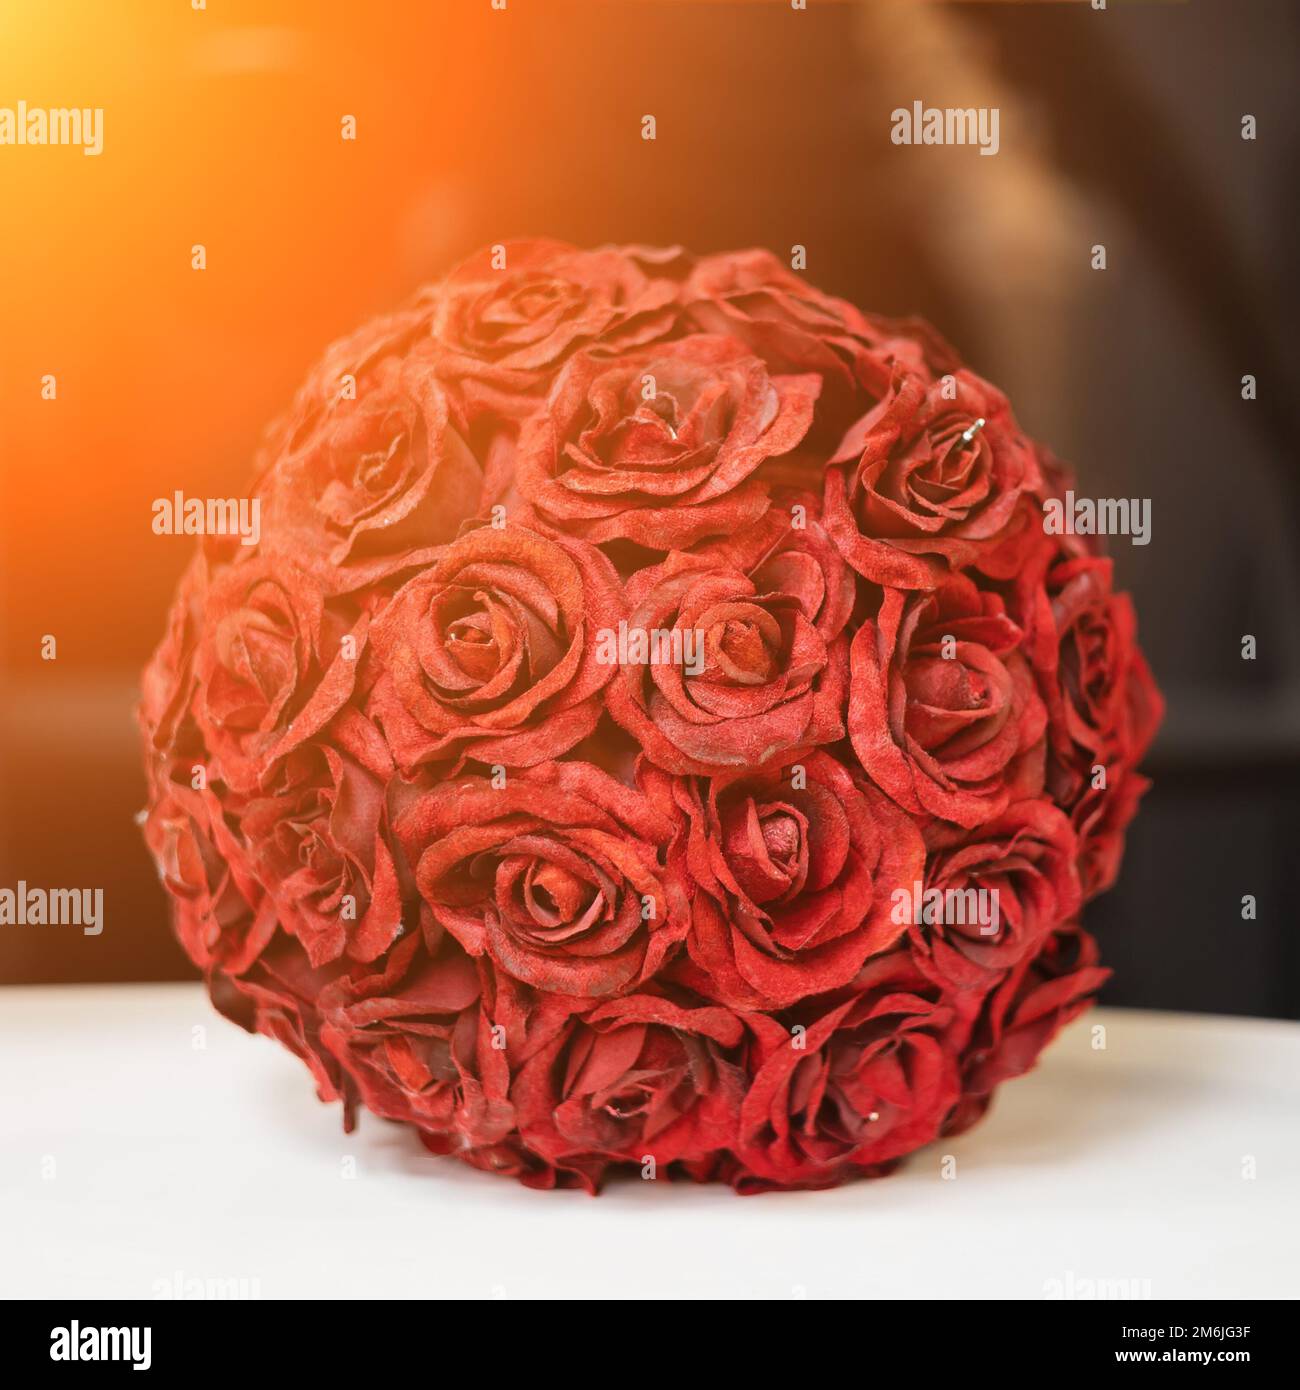 A decorative ball of red rose sepals stands on a white surface in the interior. Soft focus. Stock Photo